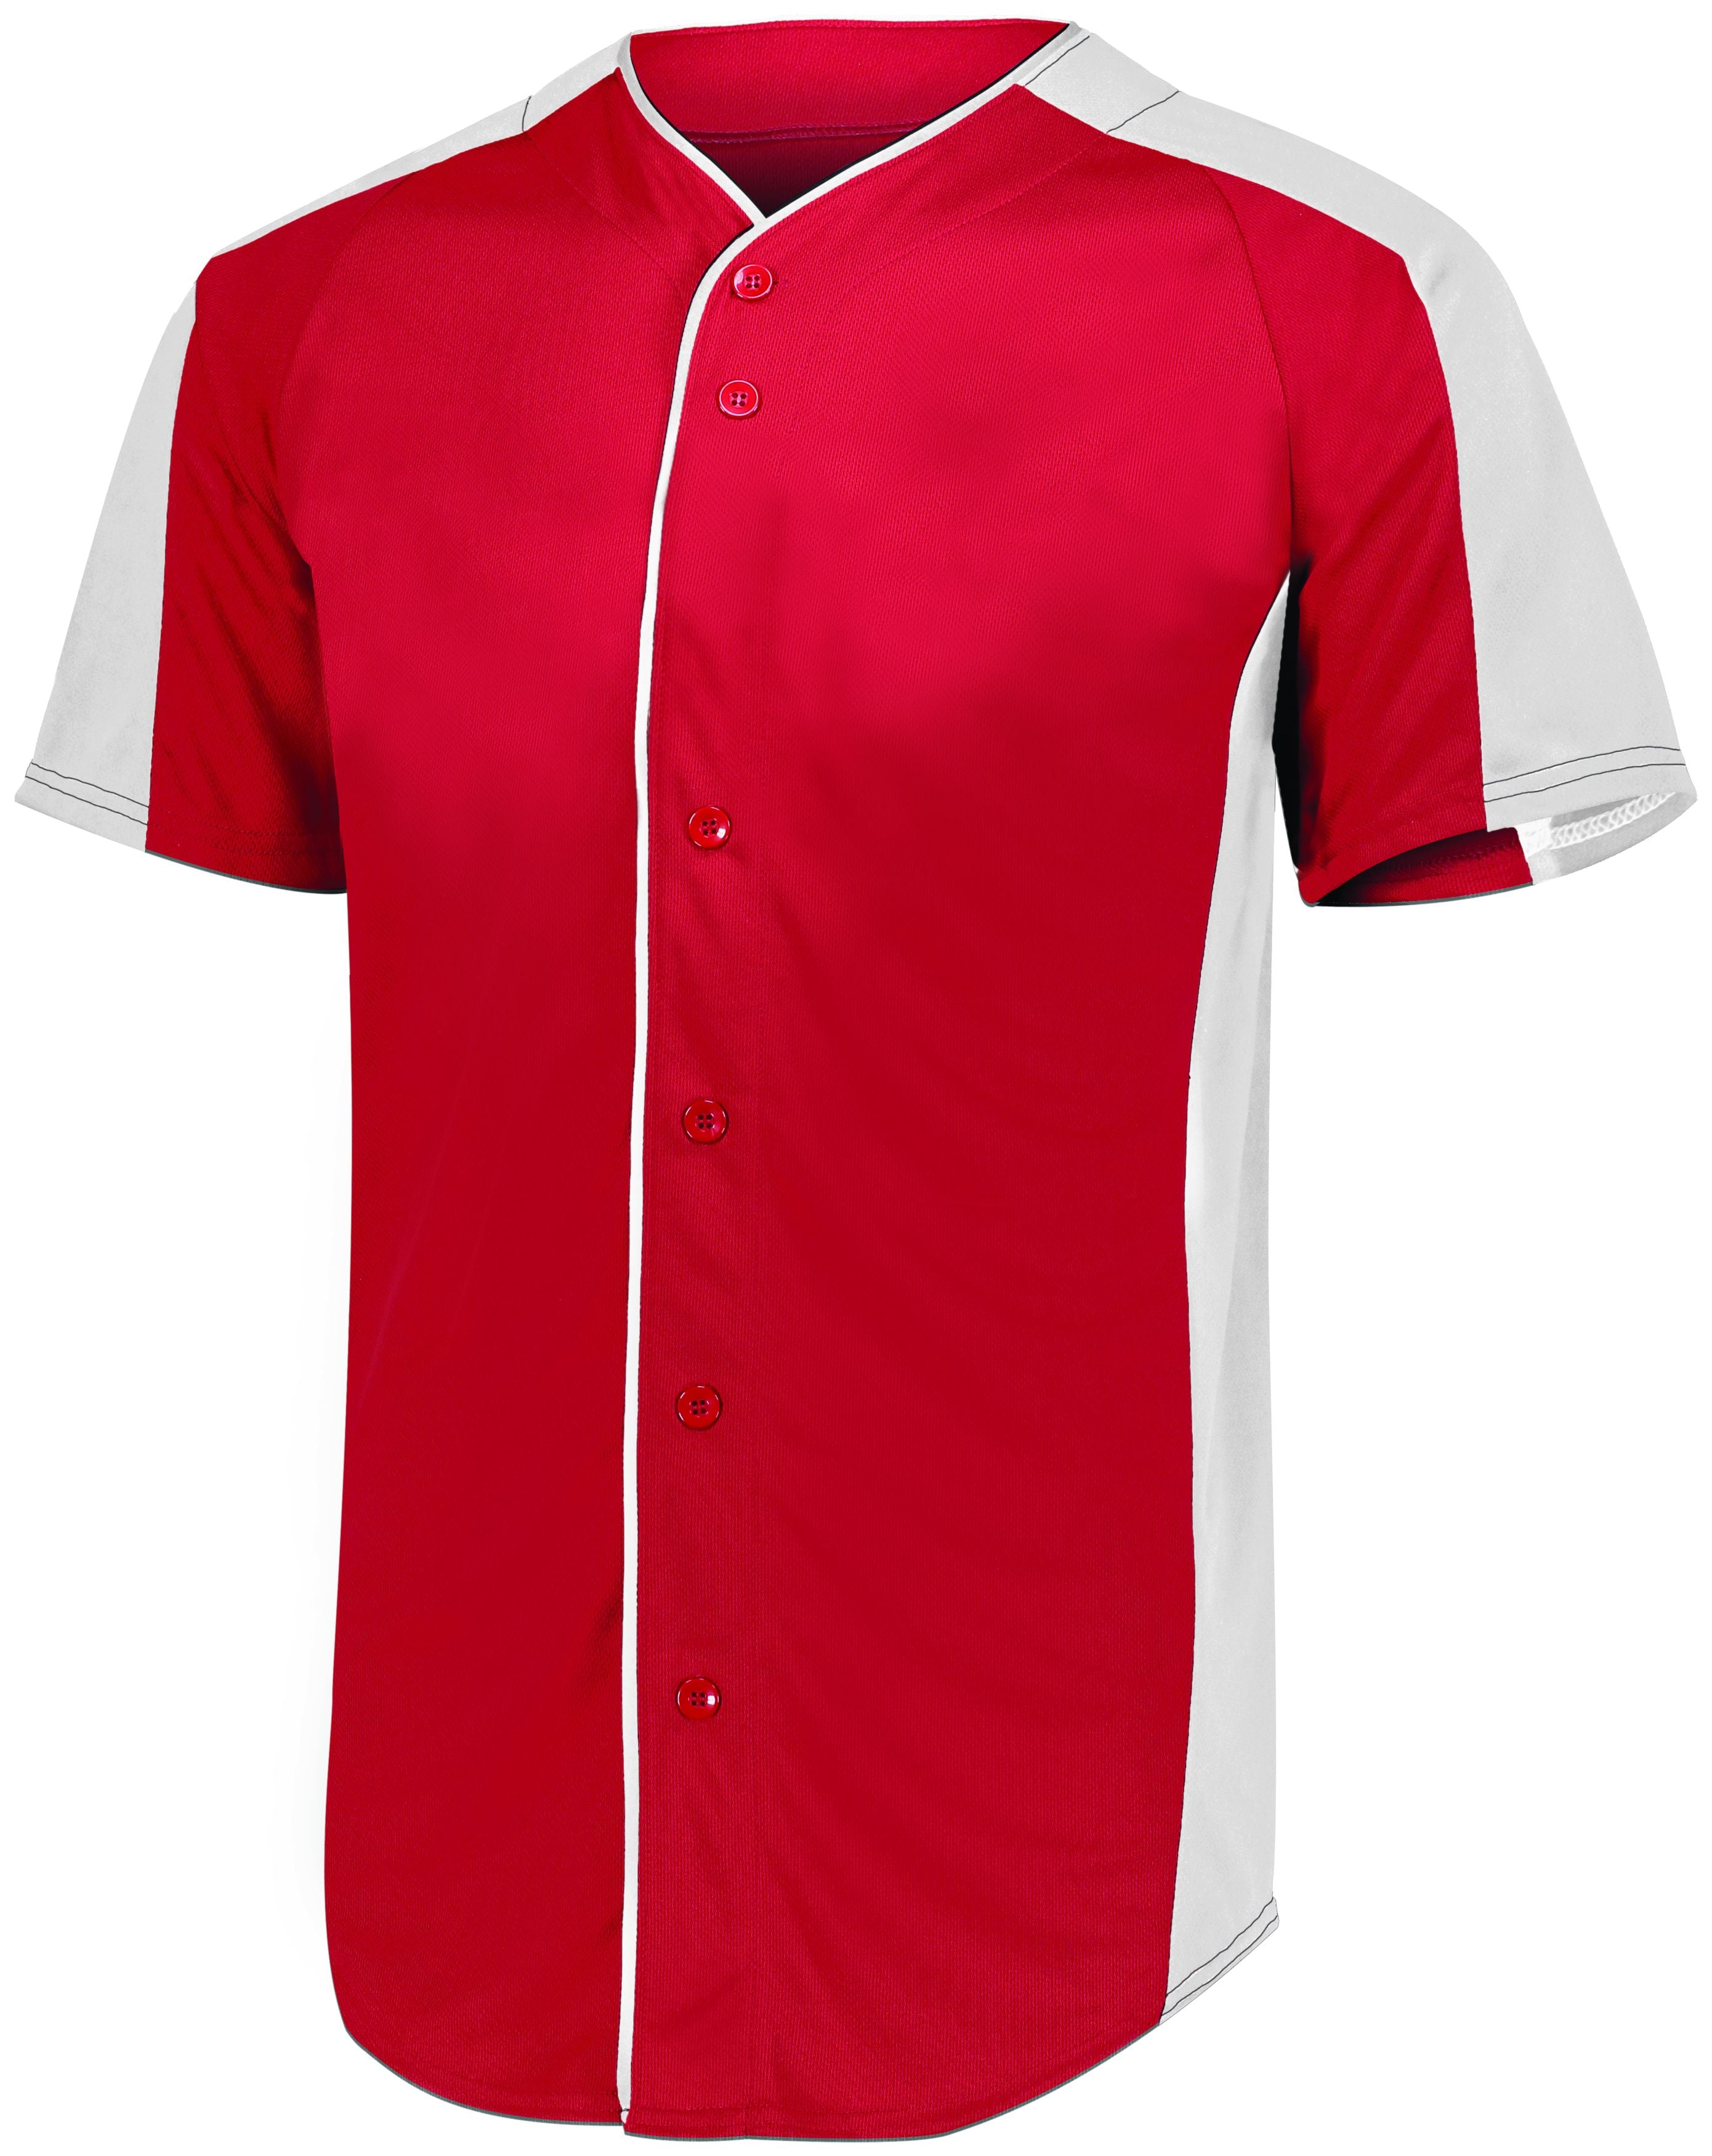 Augusta Sportswear Youth Full-Button Baseball Jersey in Red/White  -Part of the Youth, Youth-Jersey, Augusta-Products, Baseball, Shirts, All-Sports, All-Sports-1 product lines at KanaleyCreations.com